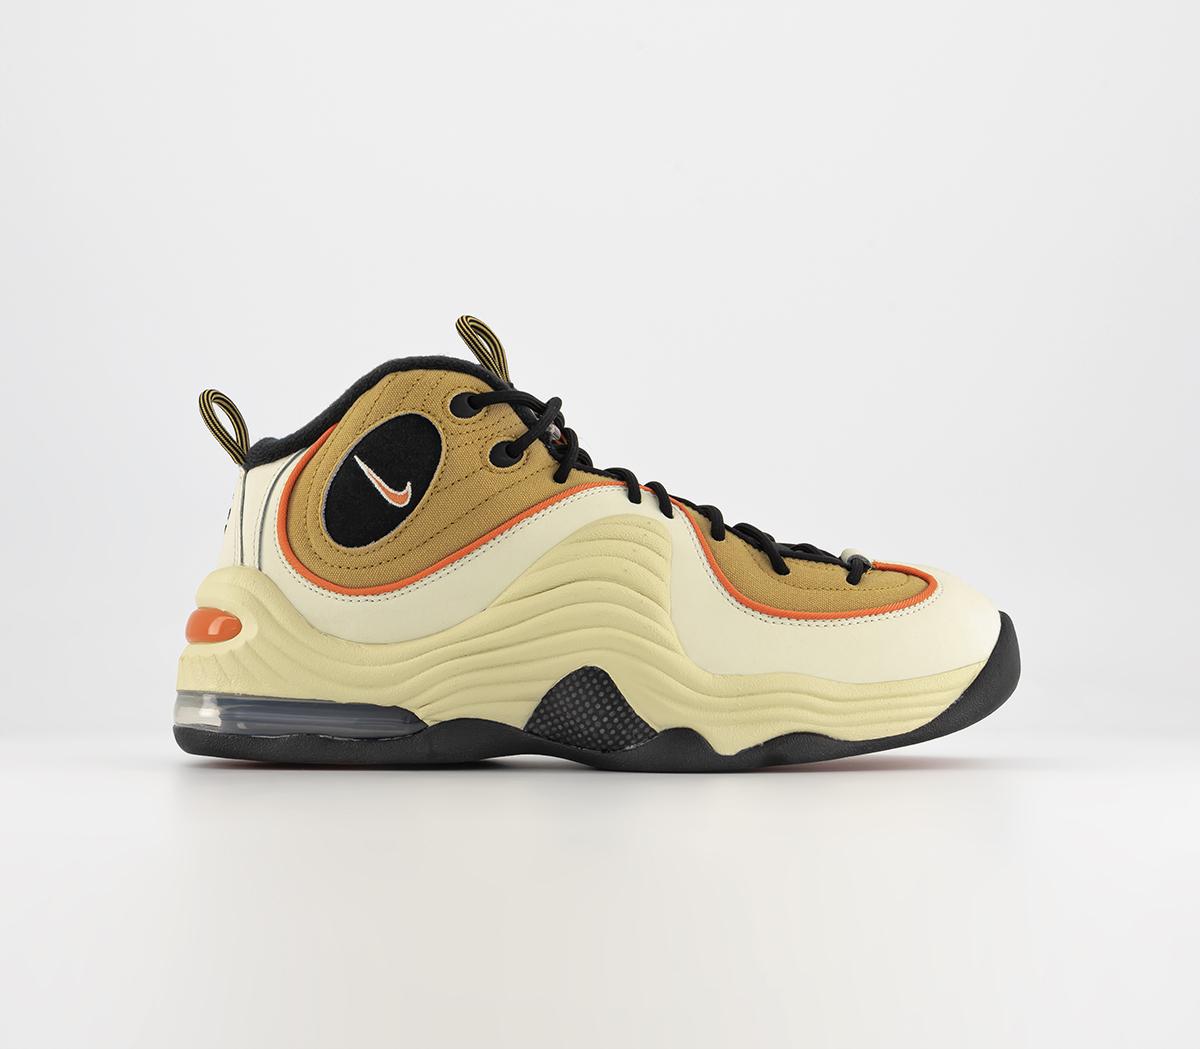 NikeAir Max Penny II Trainers Wheat Gold Safety Orange Black Coconut Milk